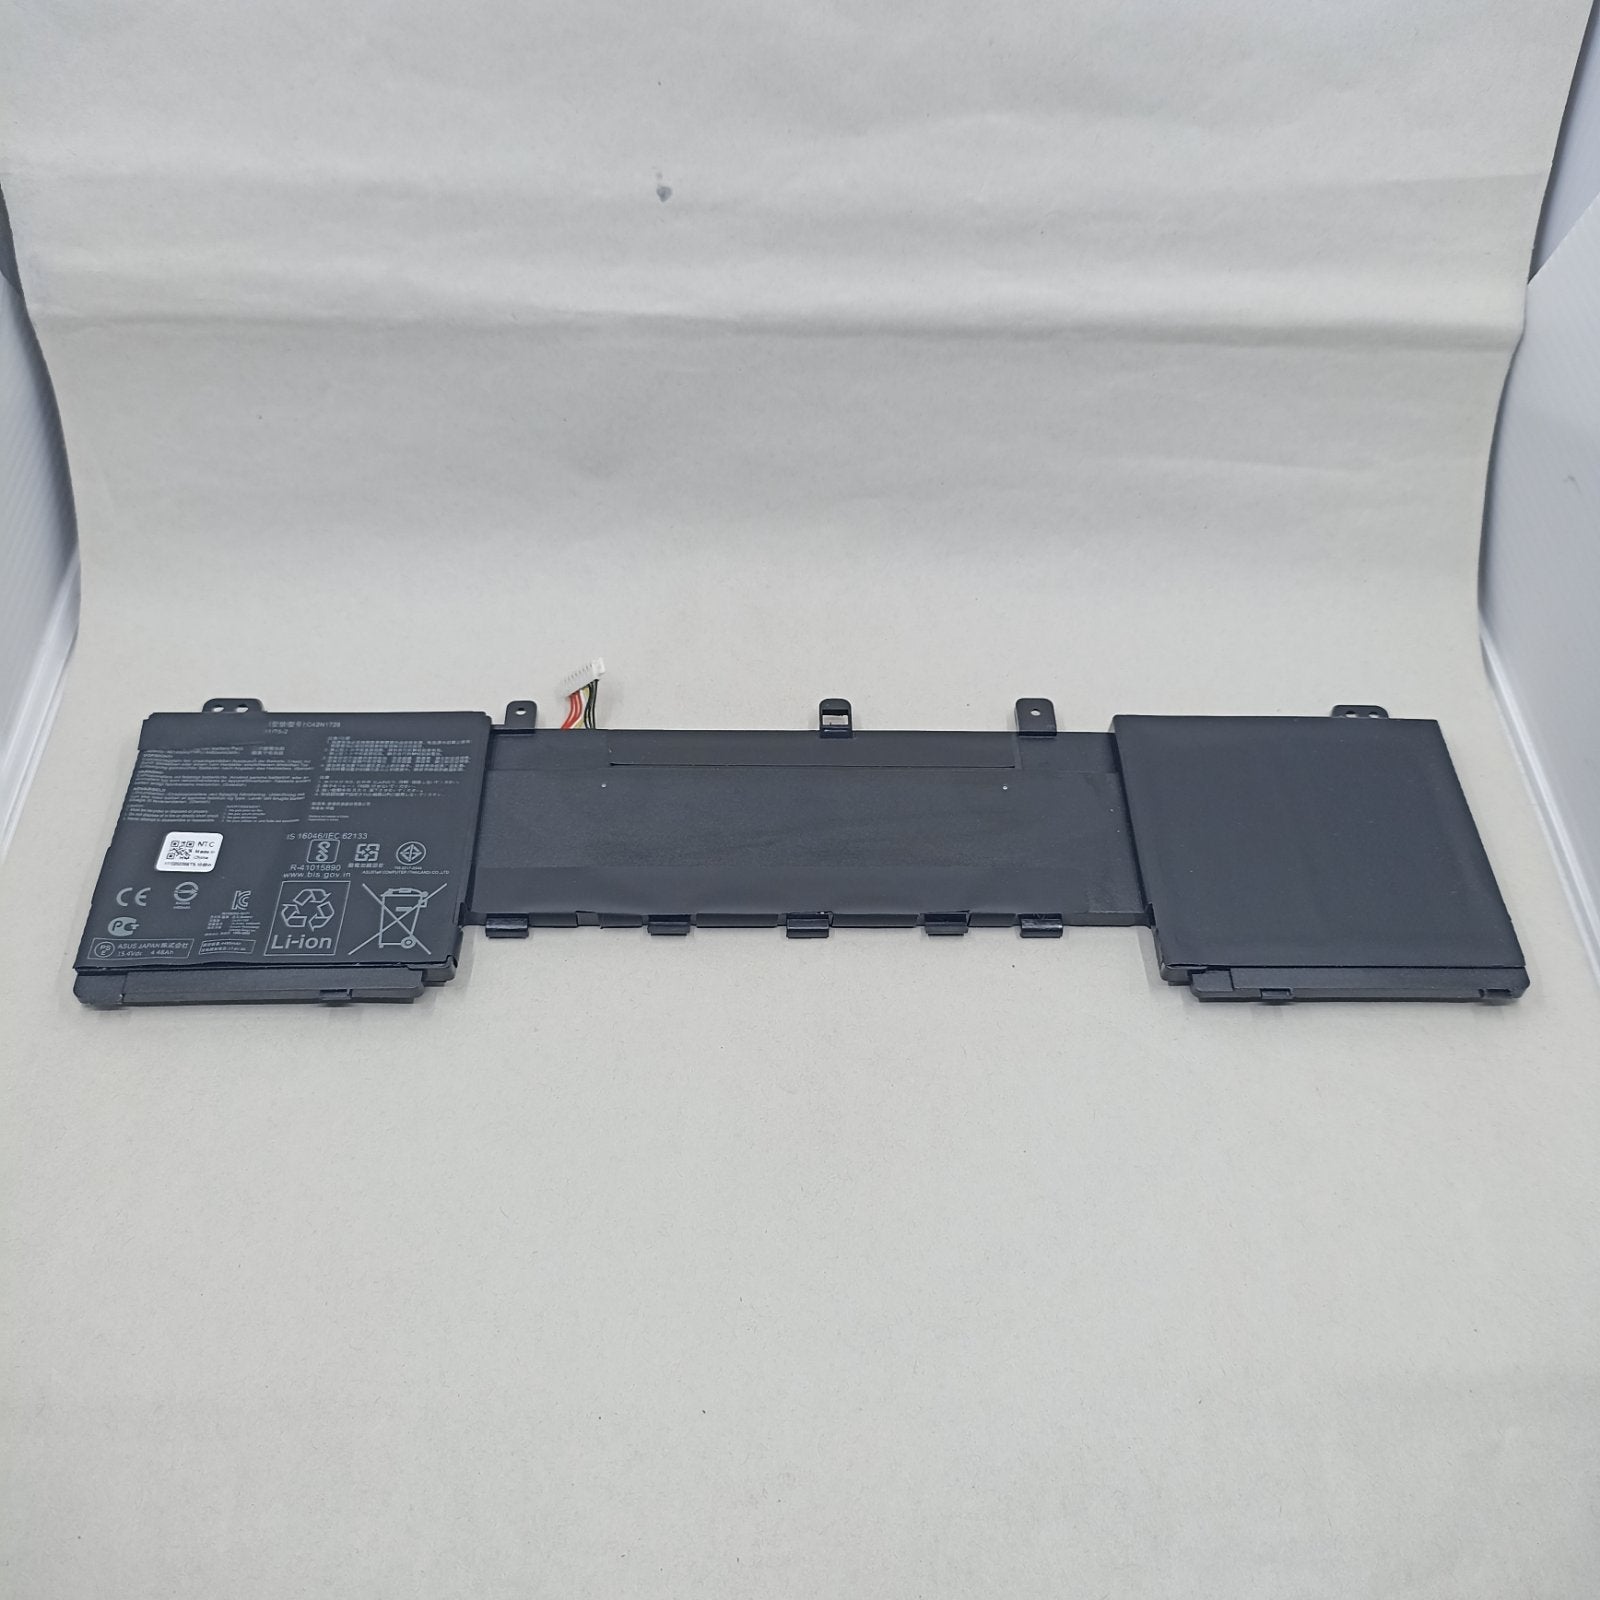 Replacement Battery for Asus UX580GE WL